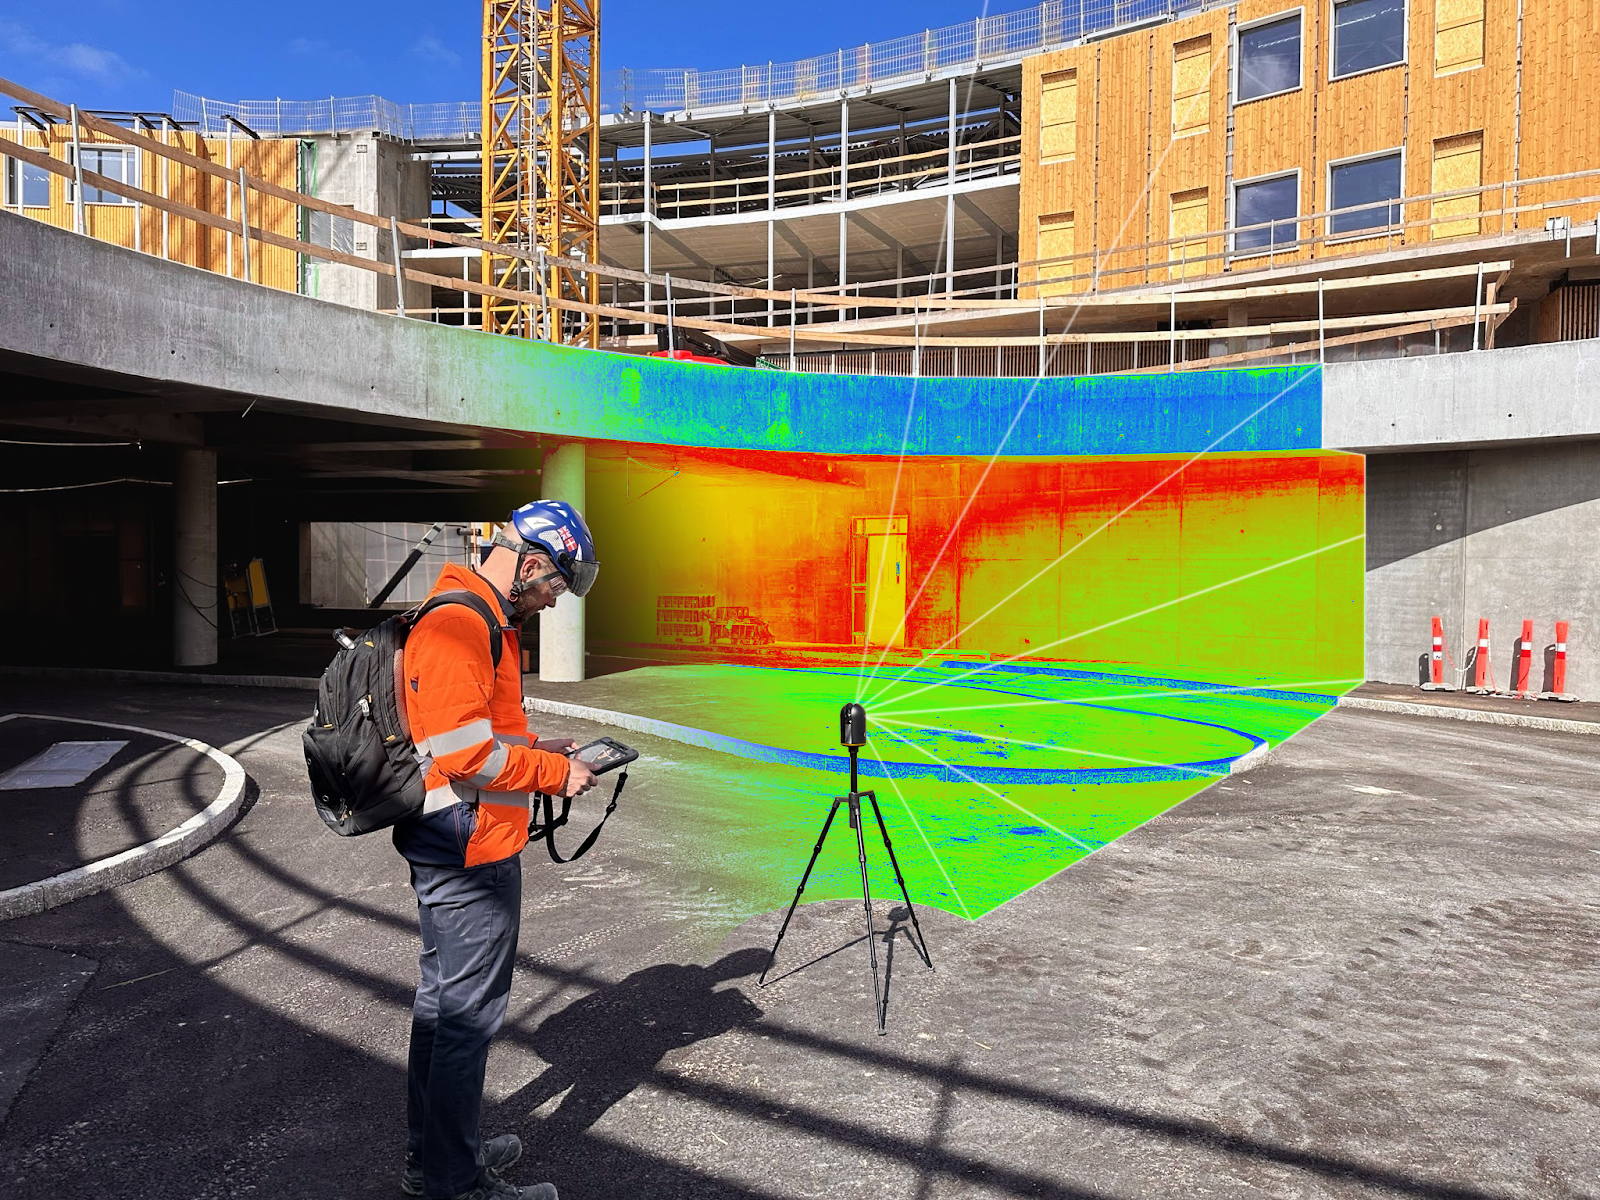 Anders scanning the construction jobsite with Imerso. This construction tech makes 3D scanning easy so anyone onsite can do it frequently.